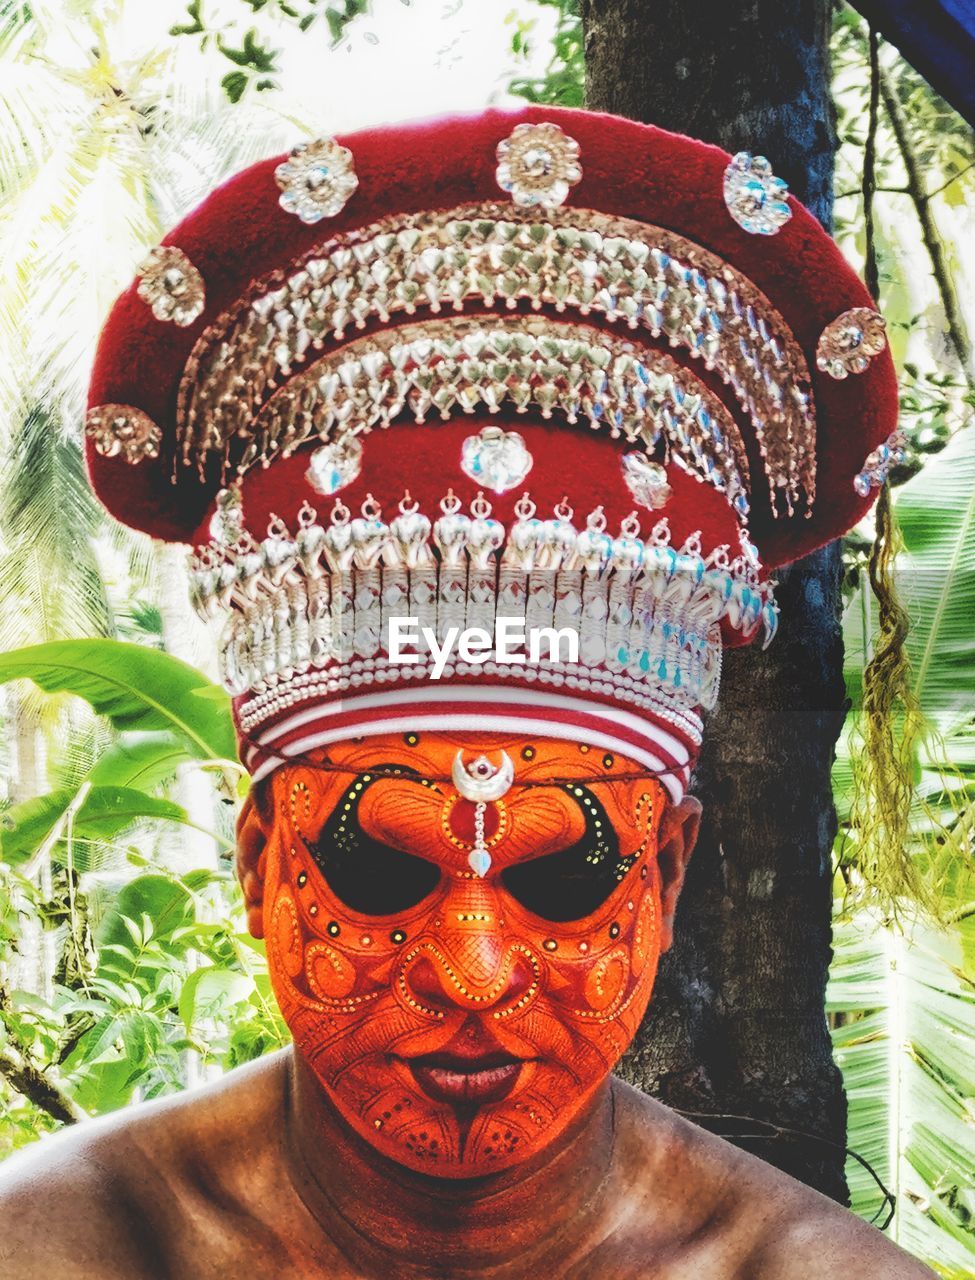 CLOSE-UP OF HUMAN MASK IN TRADITIONAL TEMPLE